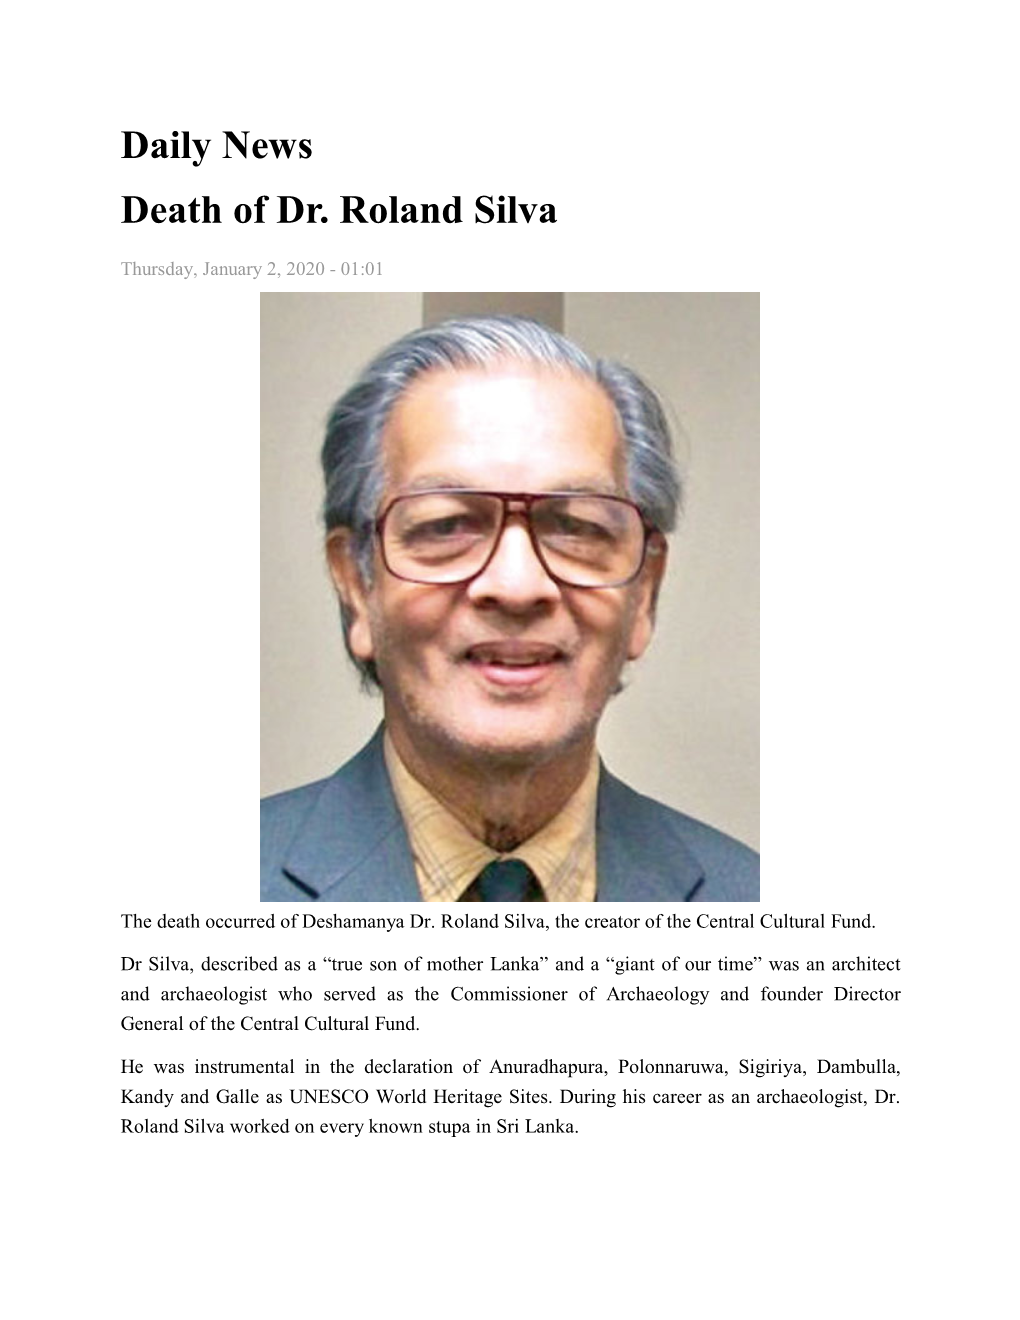 Daily News Death of Dr. Roland Silva